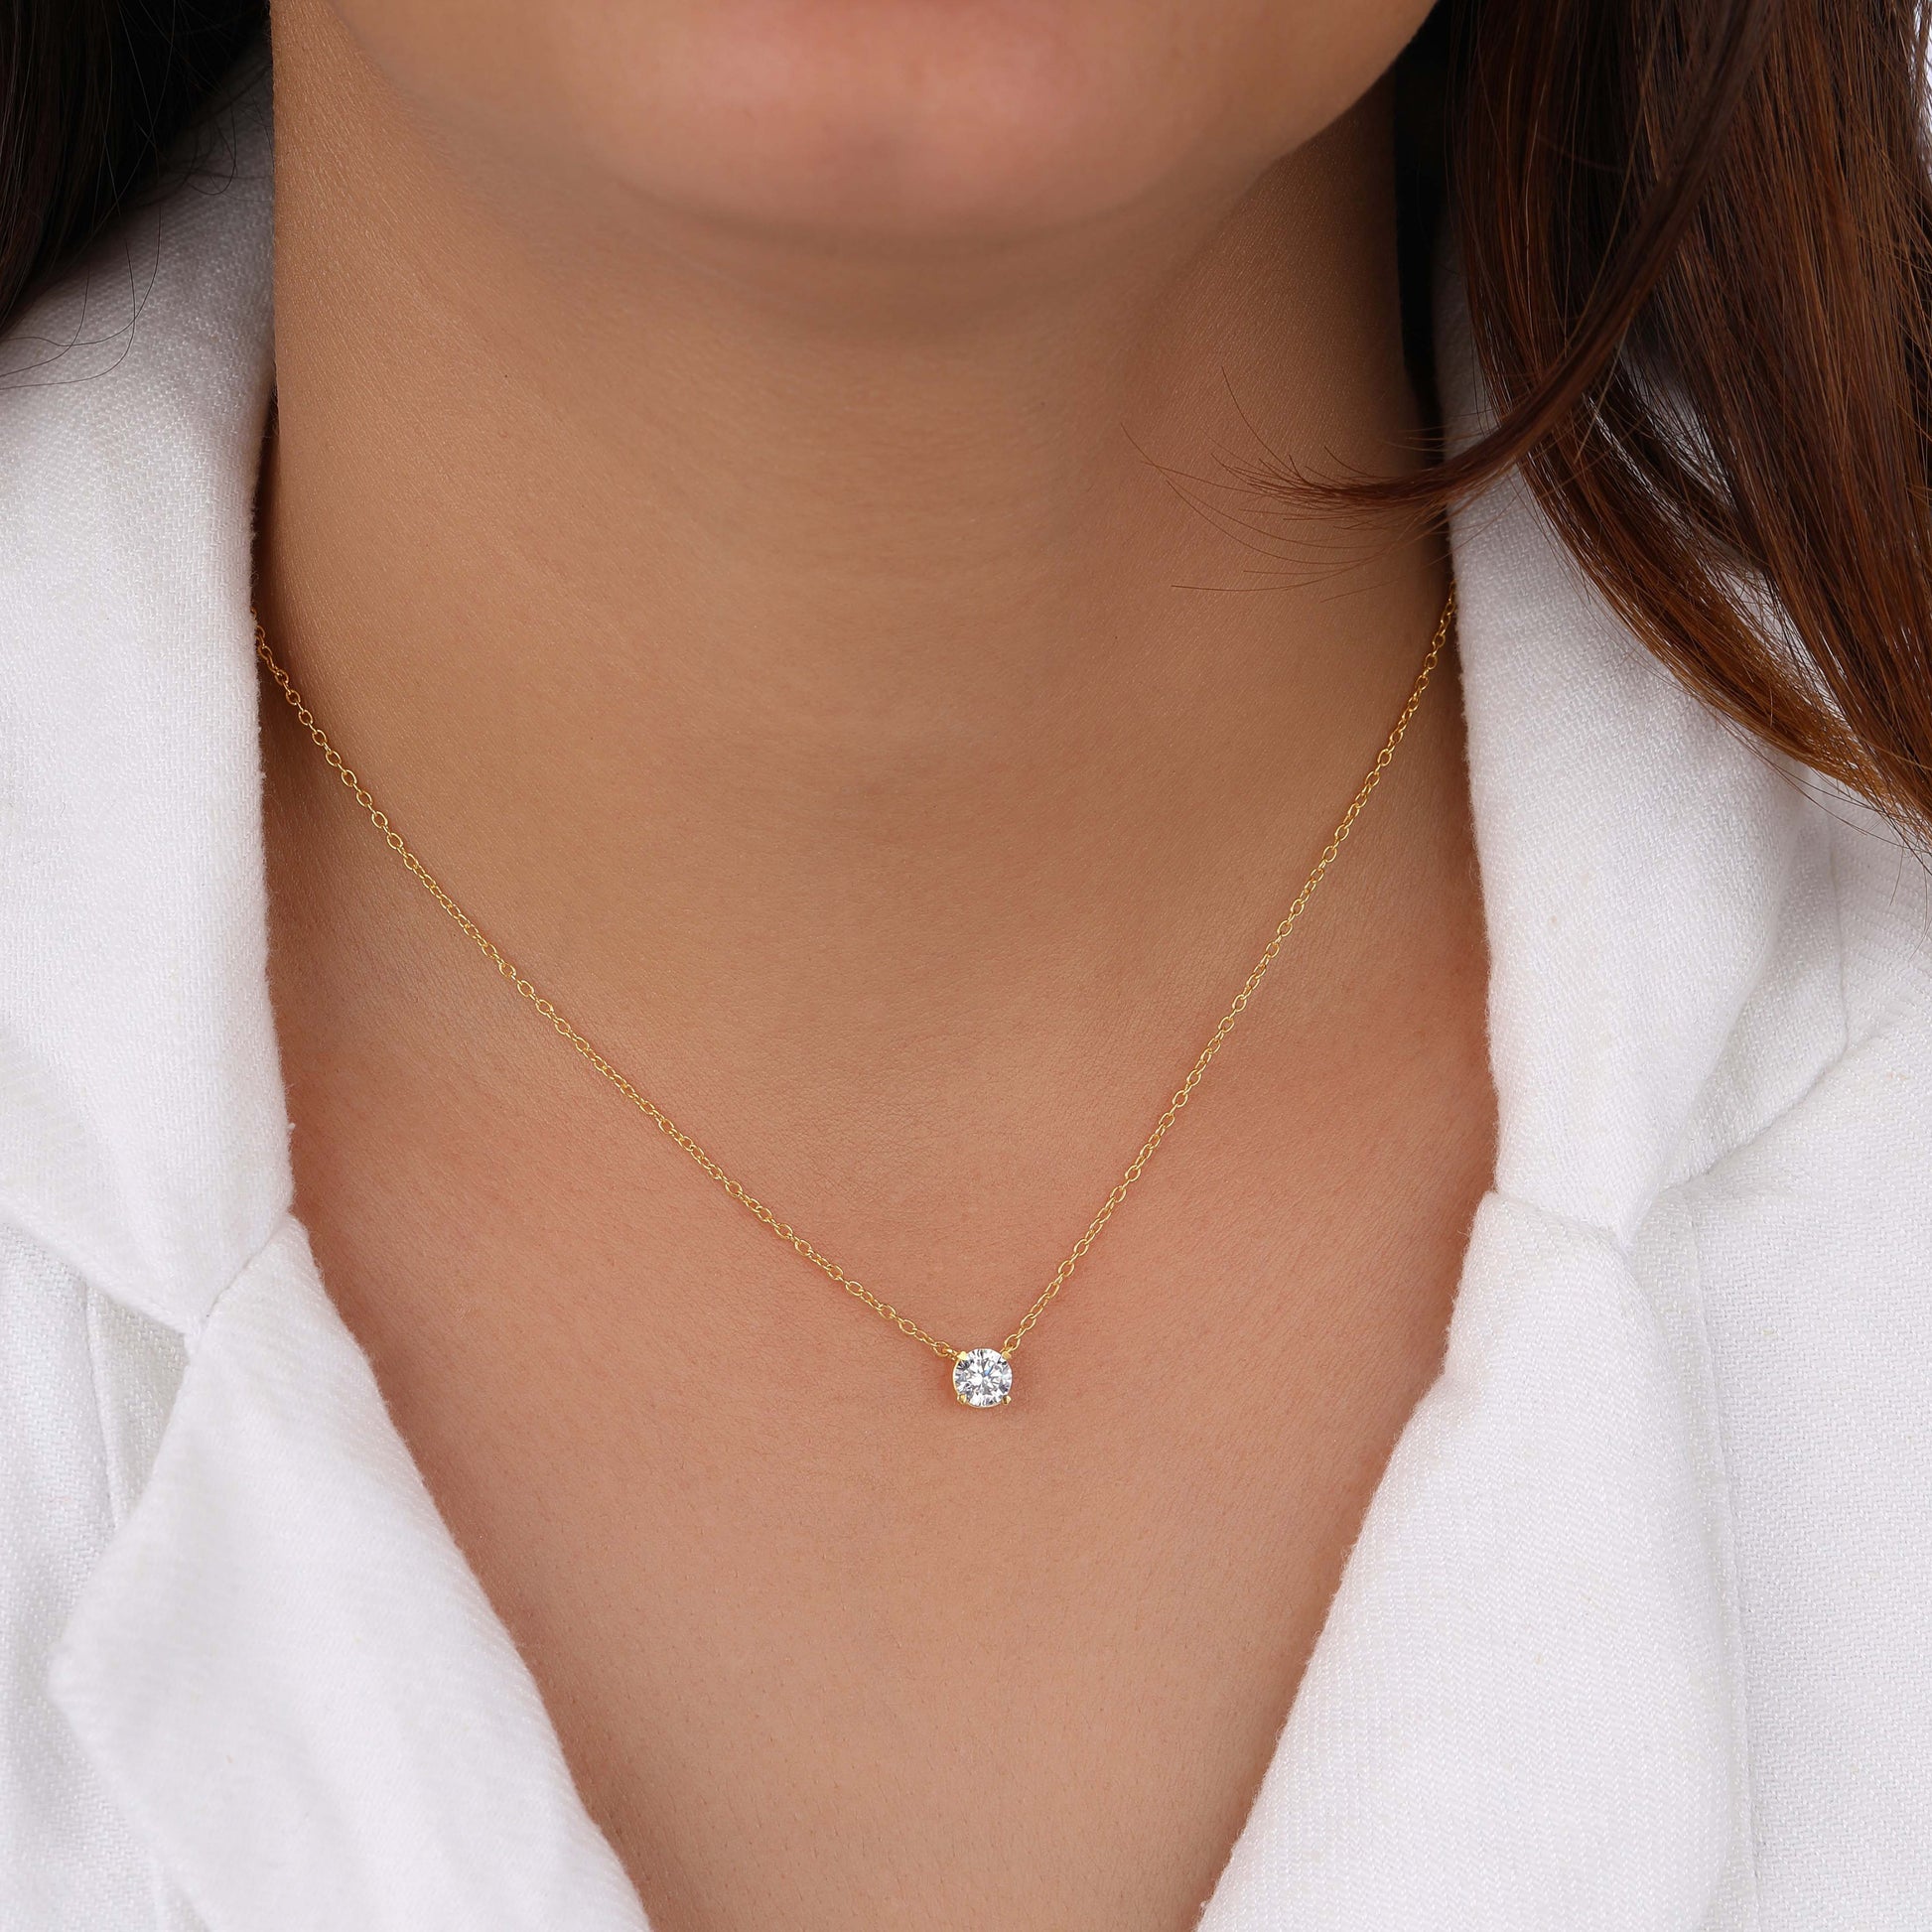 Round Diamond Solitaire Necklace in her neck